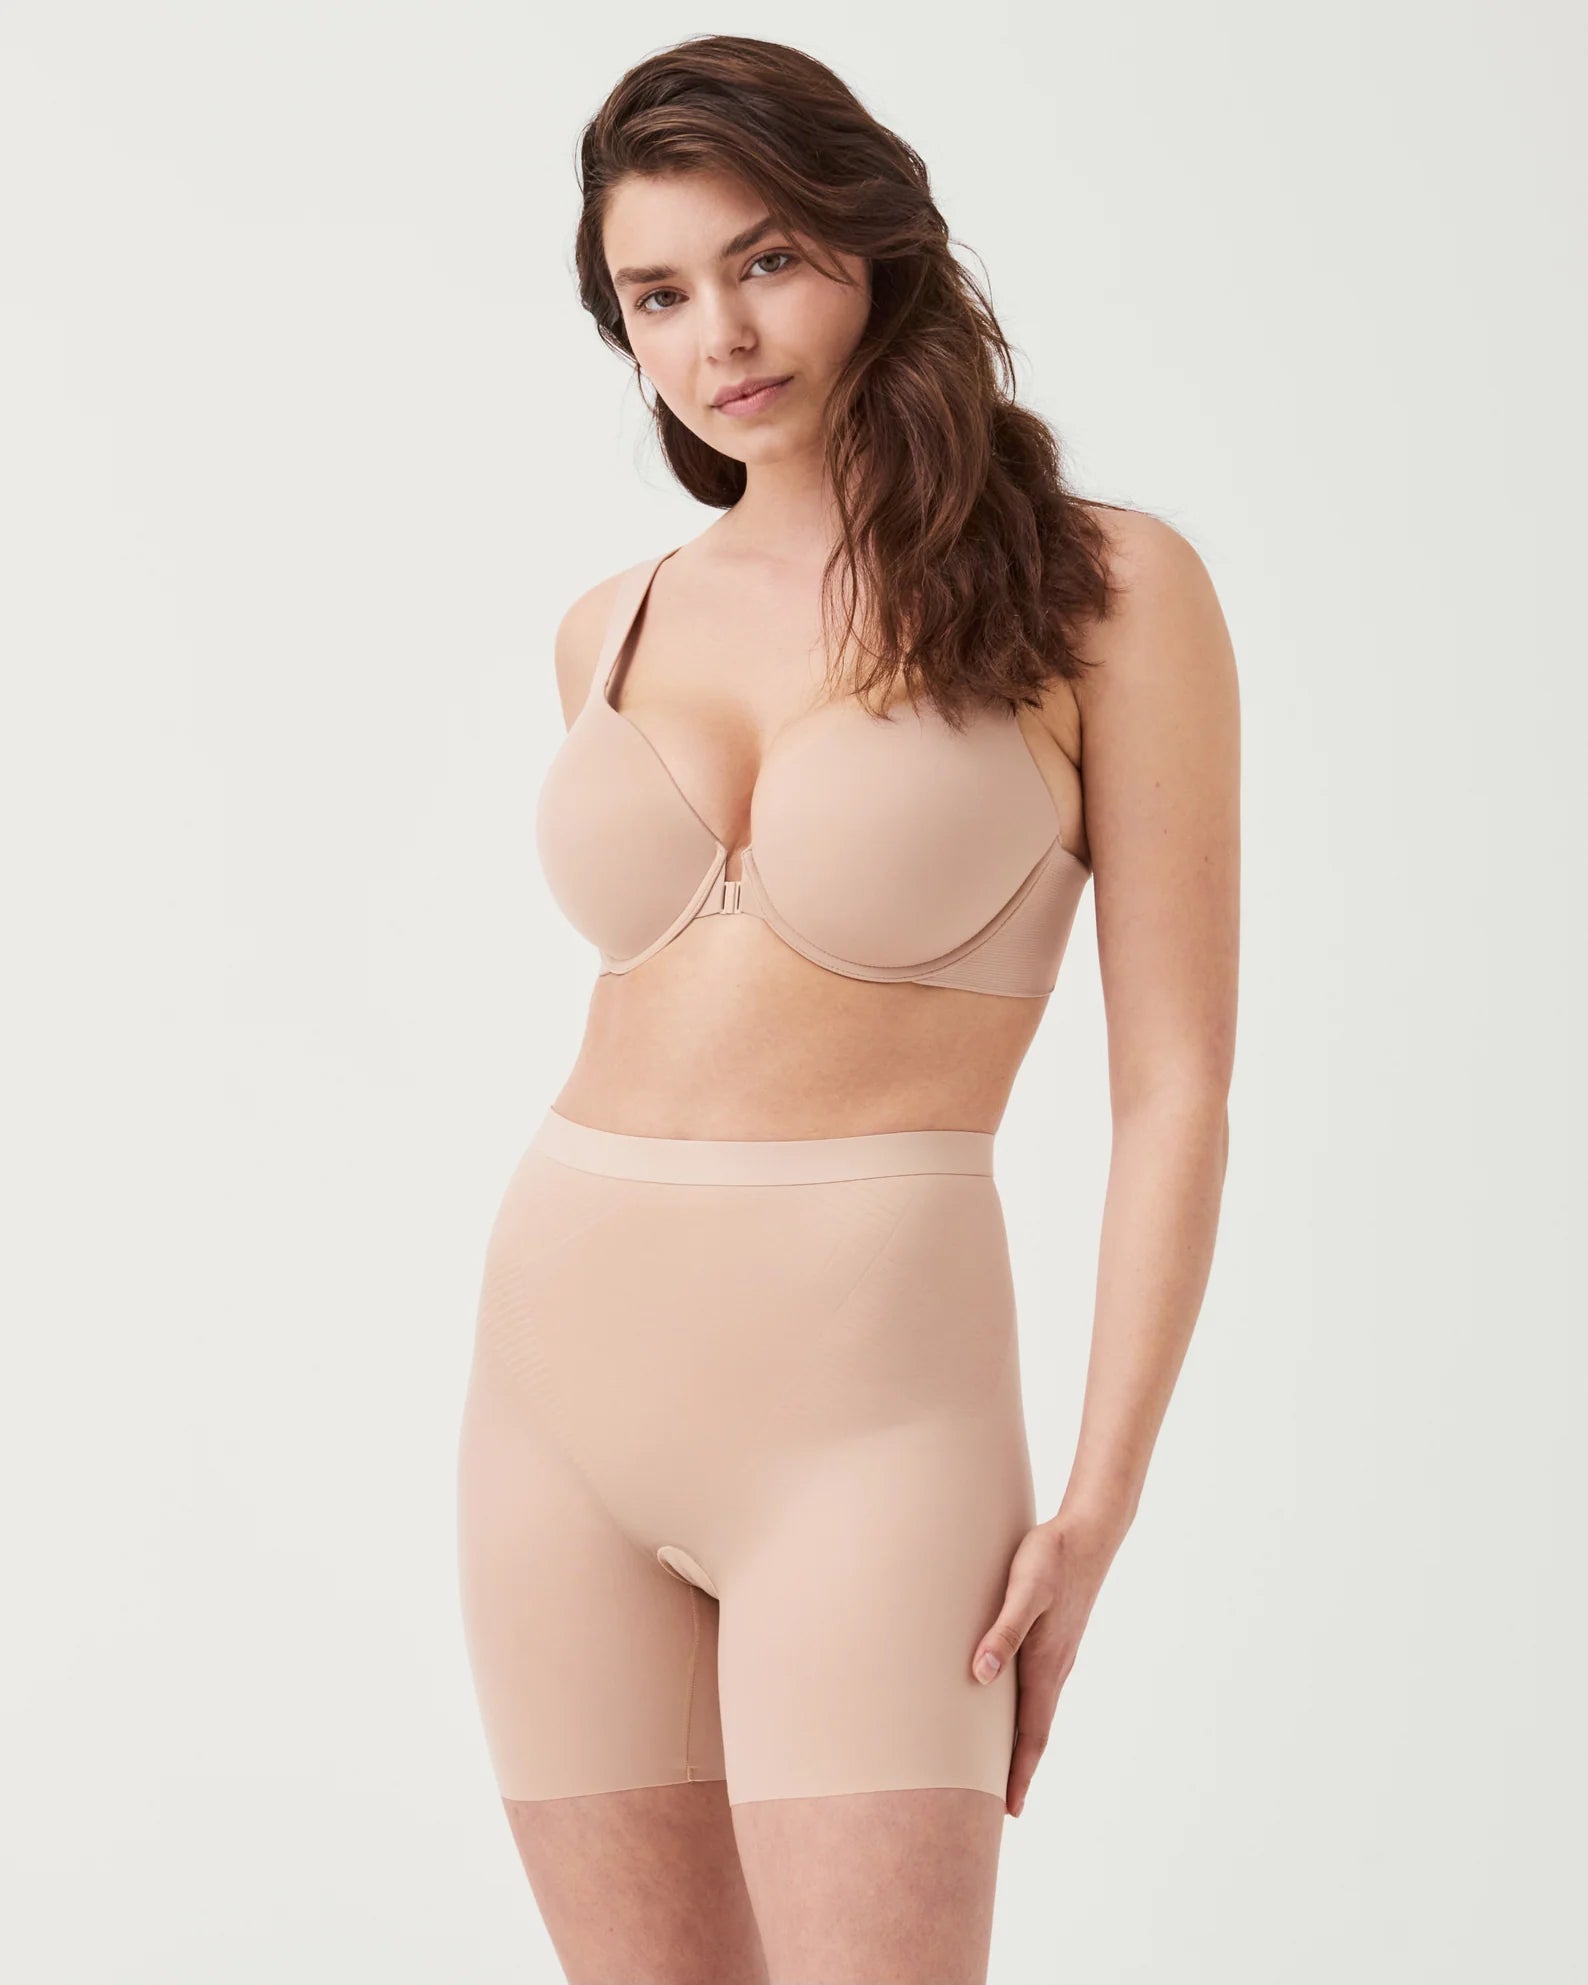 Spanx Short Invisible